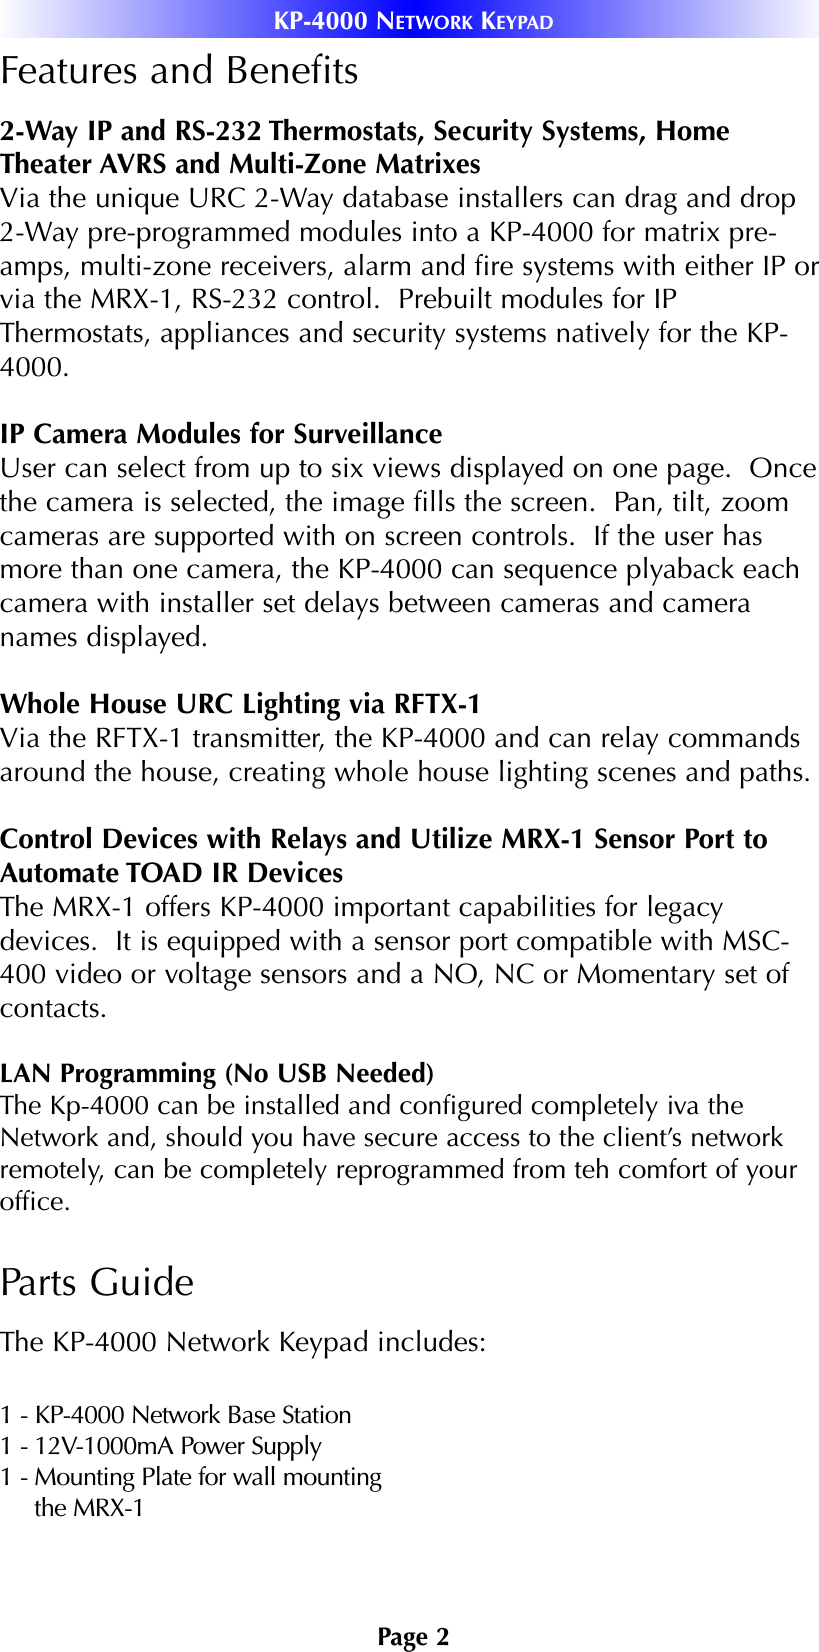 Page 2KP-4000 NETWORK KEYPADFeatures and Benefits2-Way IP and RS-232 Thermostats, Security Systems, HomeTheater AVRS and Multi-Zone MatrixesVia the unique URC 2-Way database installers can drag and drop2-Way pre-programmed modules into a KP-4000 for matrix pre-amps, multi-zone receivers, alarm and fire systems with either IP orvia the MRX-1, RS-232 control.  Prebuilt modules for IPThermostats, appliances and security systems natively for the KP-4000. IP Camera Modules for SurveillanceUser can select from up to six views displayed on one page.  Oncethe camera is selected, the image fills the screen.  Pan, tilt, zoomcameras are supported with on screen controls.  If the user hasmore than one camera, the KP-4000 can sequence plyaback eachcamera with installer set delays between cameras and cameranames displayed. Whole House URC Lighting via RFTX-1Via the RFTX-1 transmitter, the KP-4000 and can relay commandsaround the house, creating whole house lighting scenes and paths. Control Devices with Relays and Utilize MRX-1 Sensor Port toAutomate TOAD IR DevicesThe MRX-1 offers KP-4000 important capabilities for legacydevices.  It is equipped with a sensor port compatible with MSC-400 video or voltage sensors and a NO, NC or Momentary set ofcontacts.  LAN Programming (No USB Needed)The Kp-4000 can be installed and configured completely iva theNetwork and, should you have secure access to the client’s networkremotely, can be completely reprogrammed from teh comfort of youroffice. Parts GuideThe KP-4000 Network Keypad includes:1 - KP-4000 Network Base Station1 - 12V-1000mA Power Supply1 - Mounting Plate for wall mountingthe MRX-1